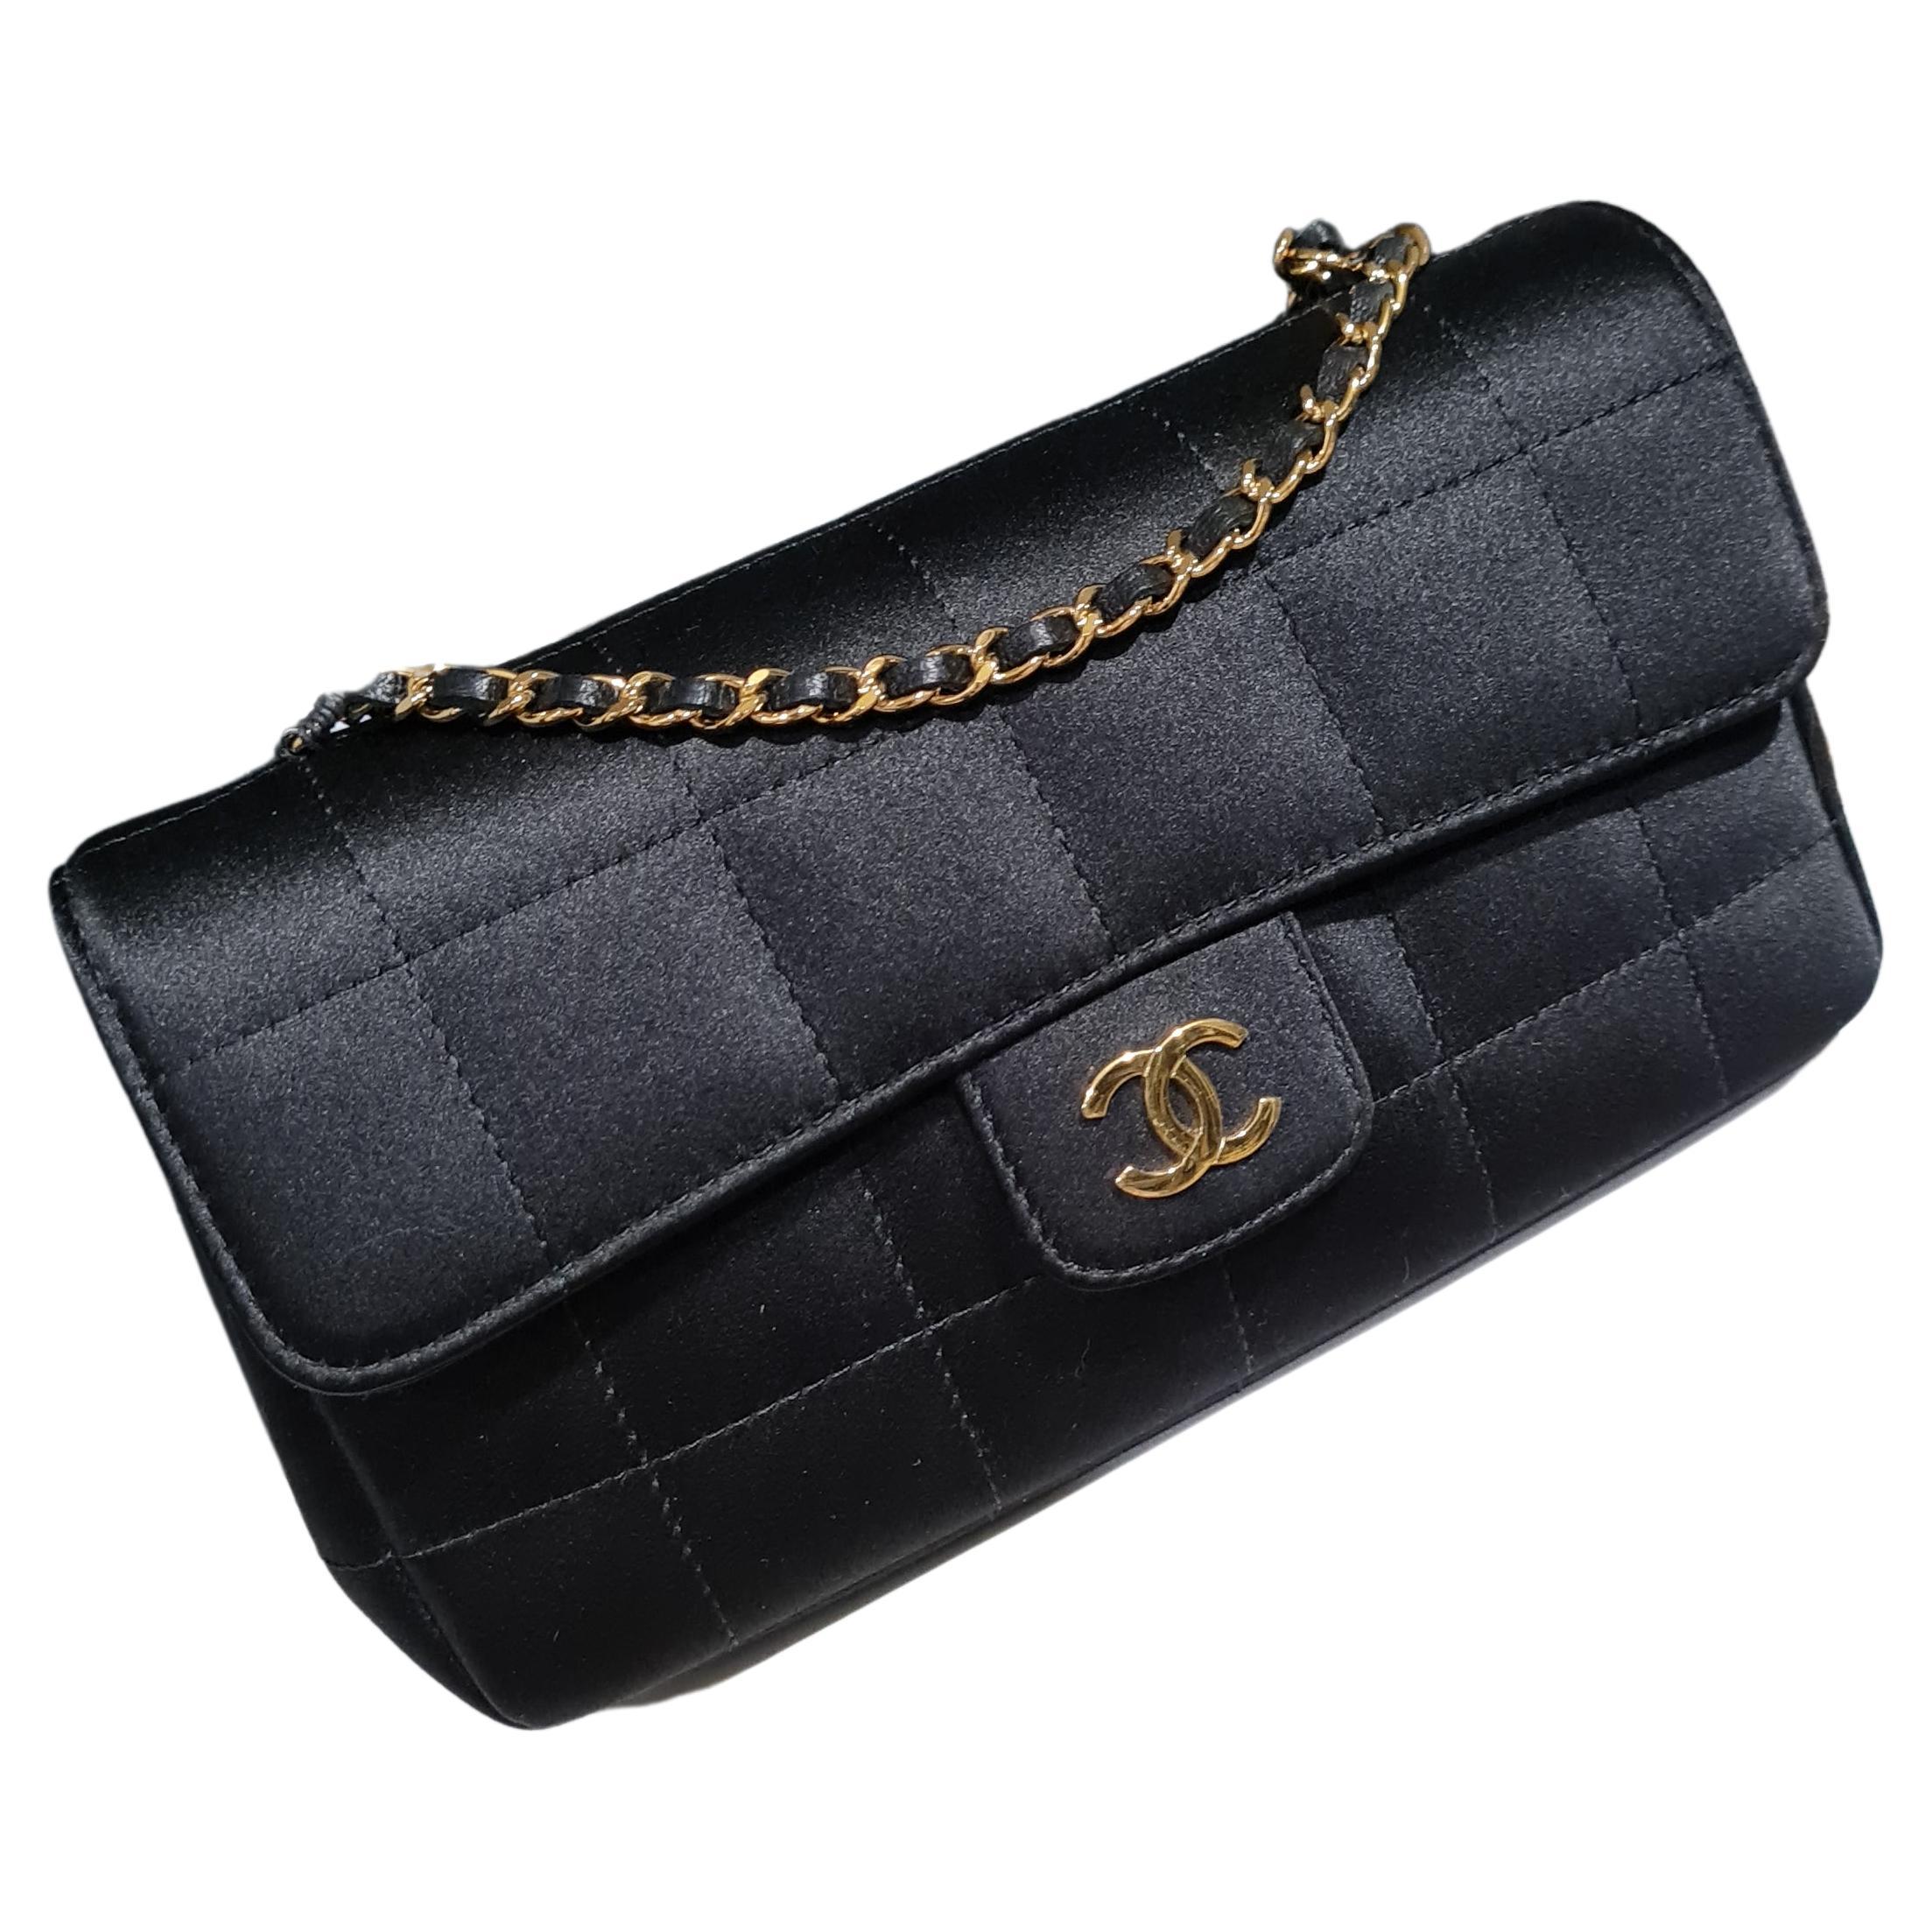 Chanel Black Quilted Aged Calfskin Lucky Charms 2.55 Reissue 255